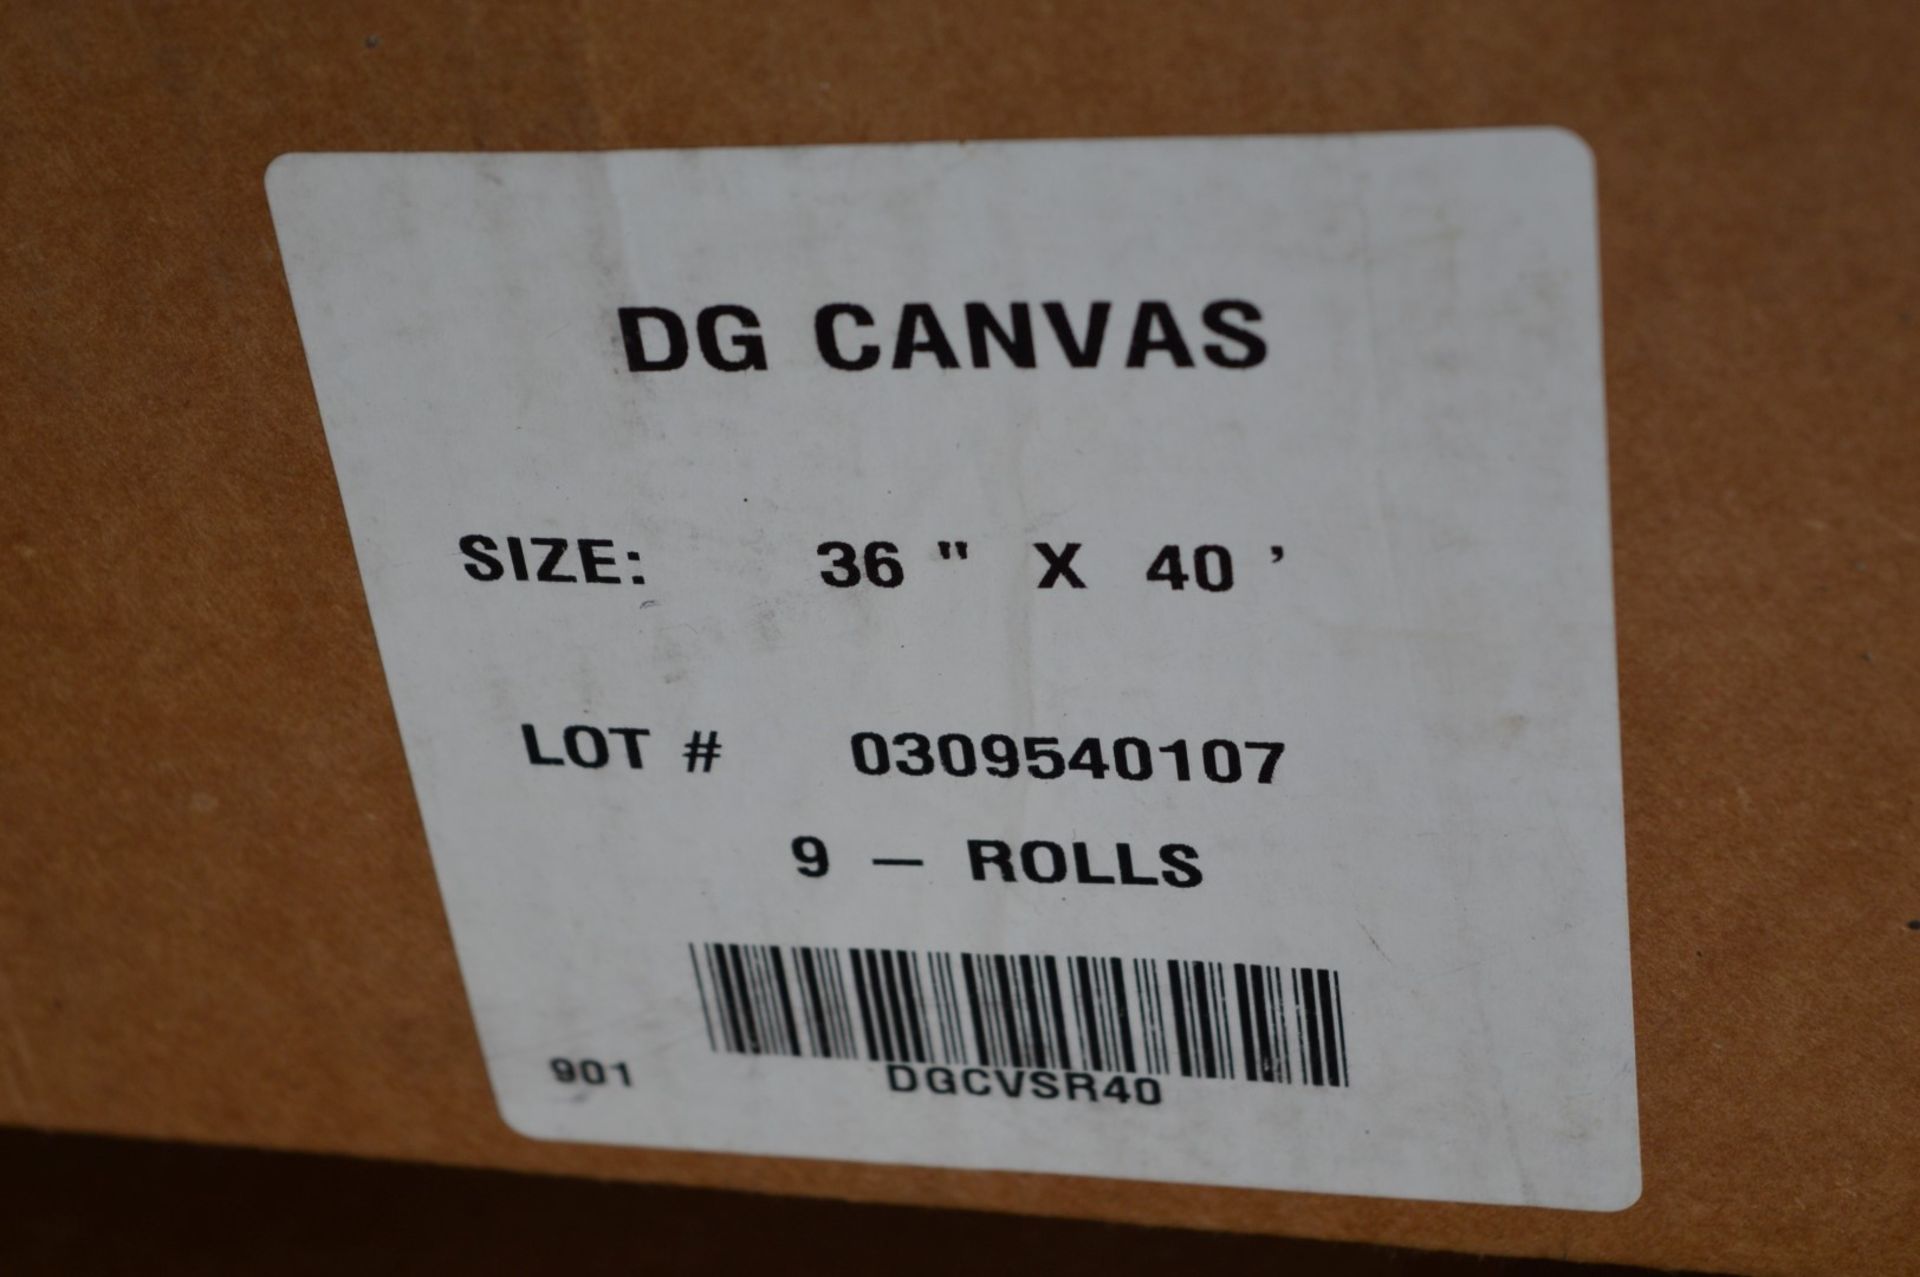 1 x Roll of IJTechnologies DuraGraphix Textured Canvas - Size 36" x 40' - Engineered to Provide - Image 2 of 2